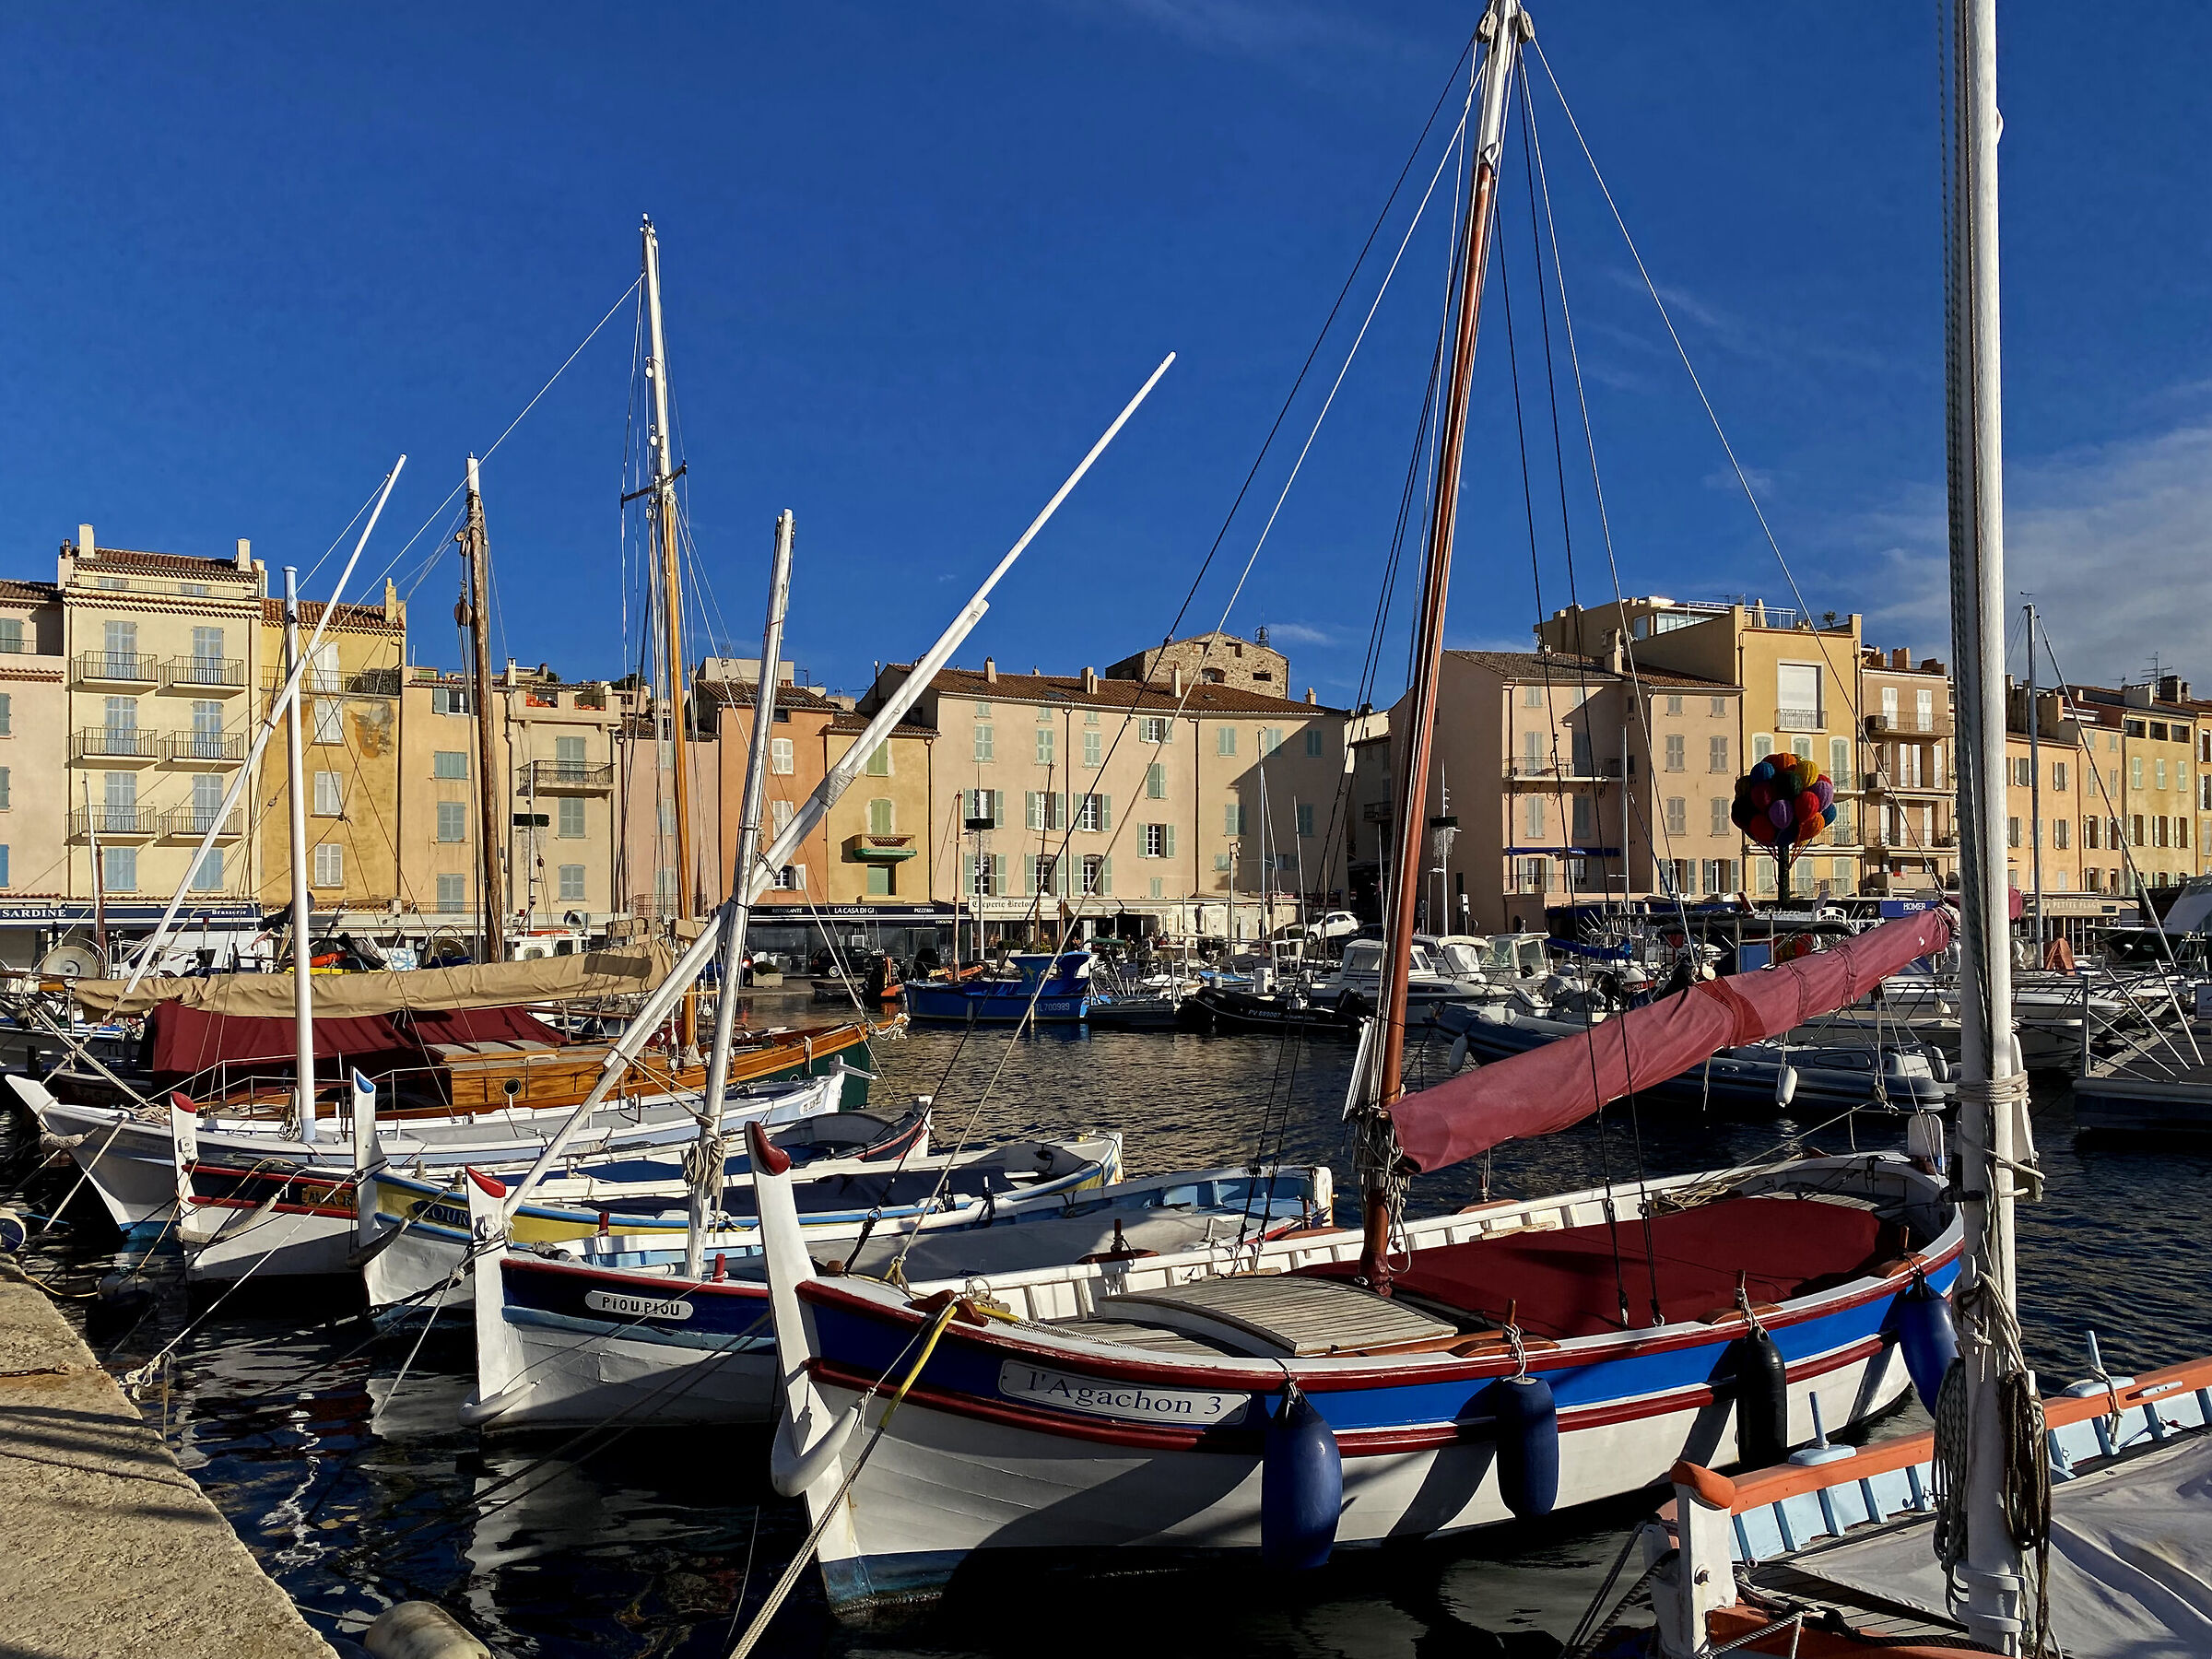 Fishing boats in the old port of Saint-Tropez...